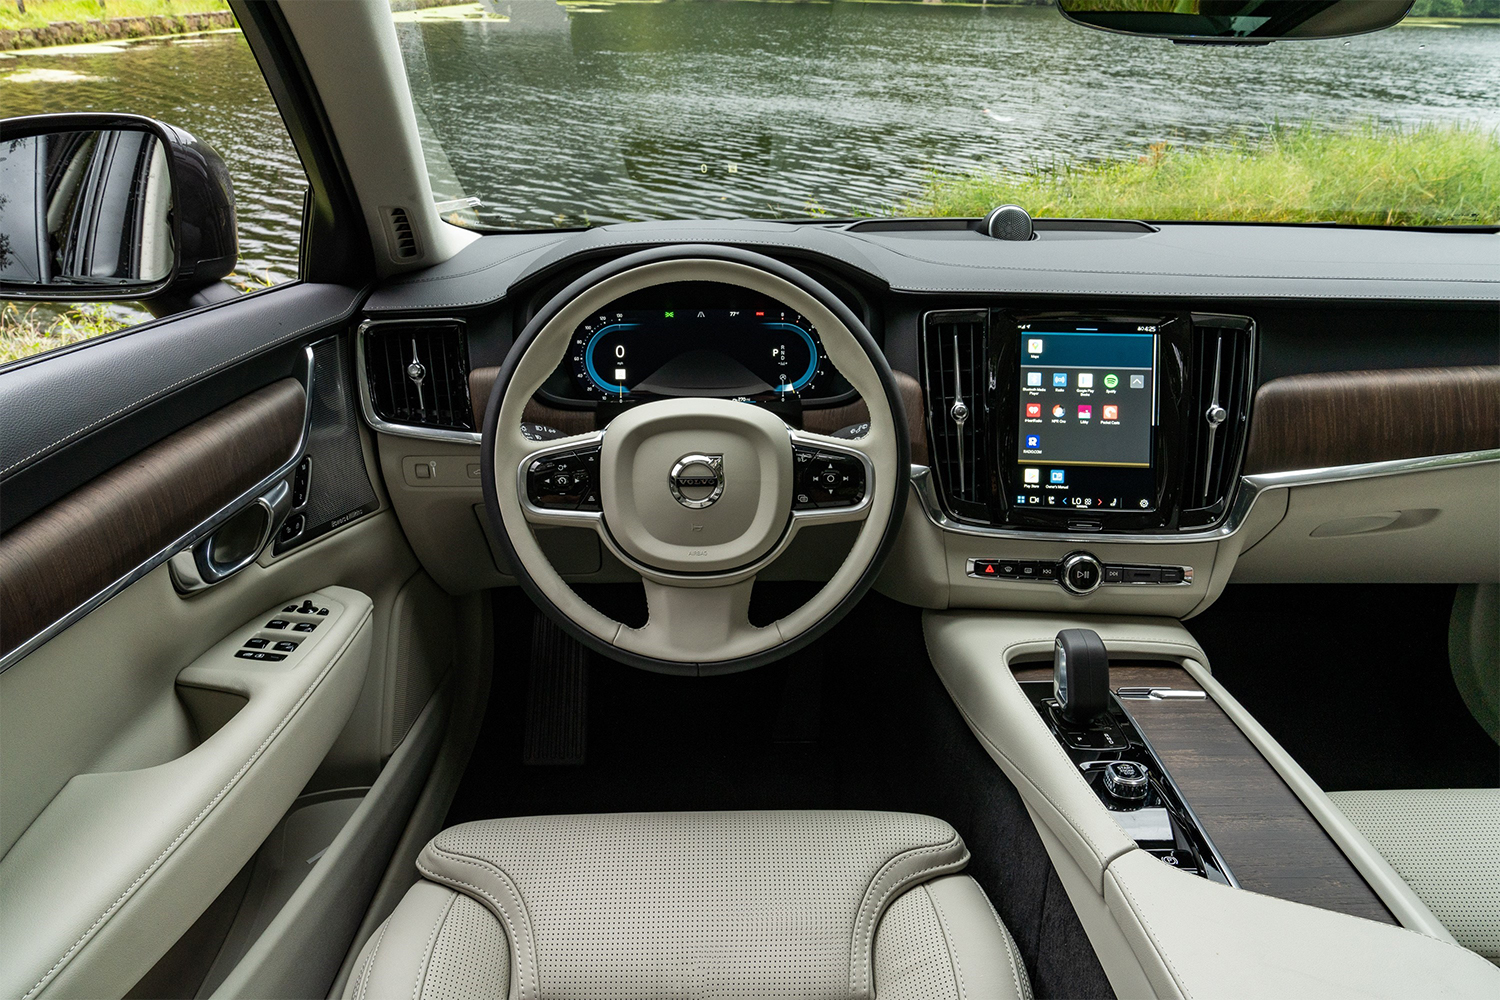 The driver's seat in the 2022 Volvo V90 Cross Country, showing the steering wheel, gauge cluster and infotainment